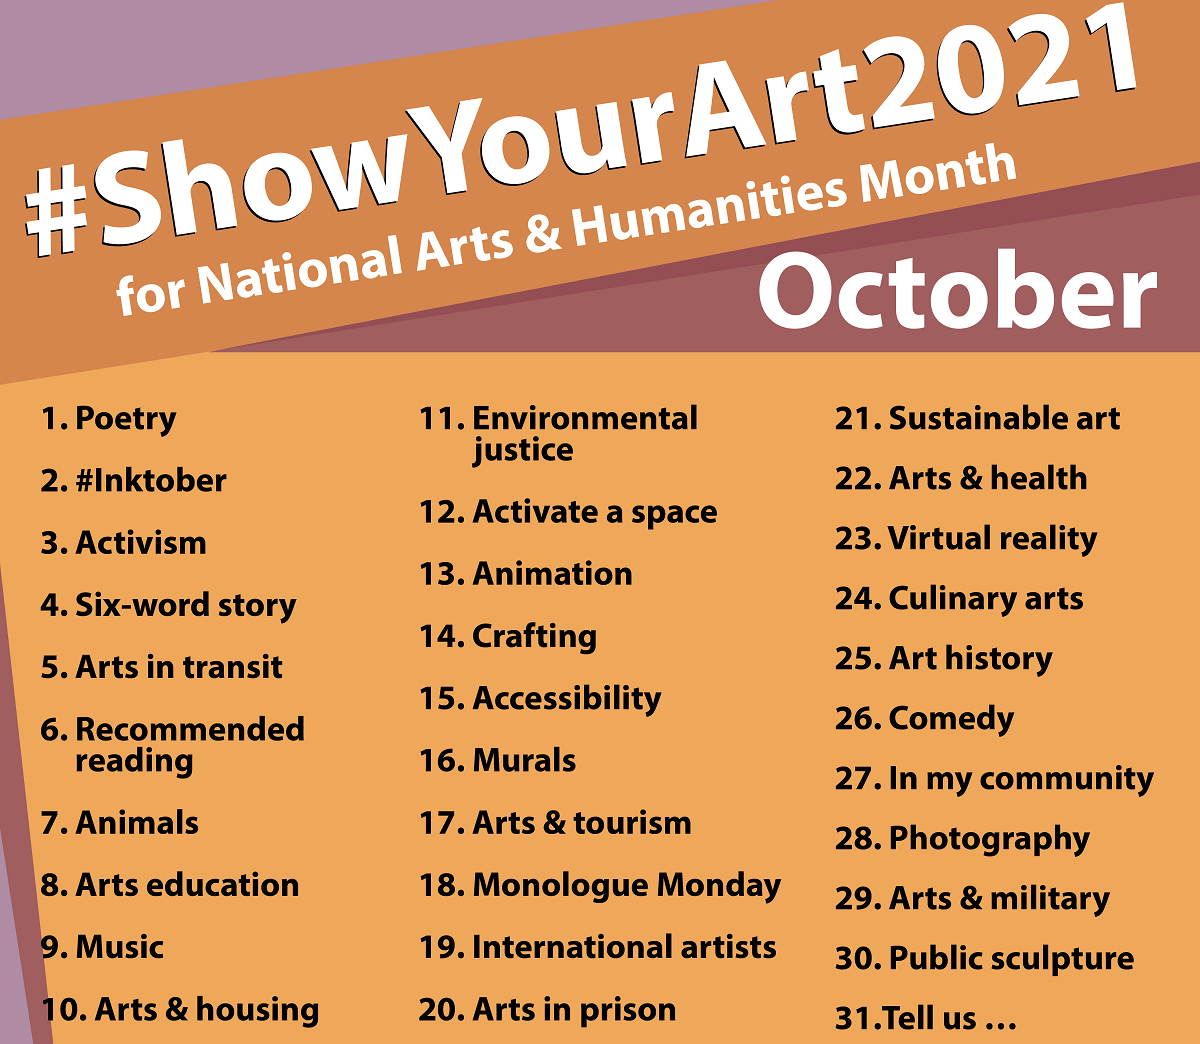 Show Your Art for National Arts & Humanities Month-October 2021